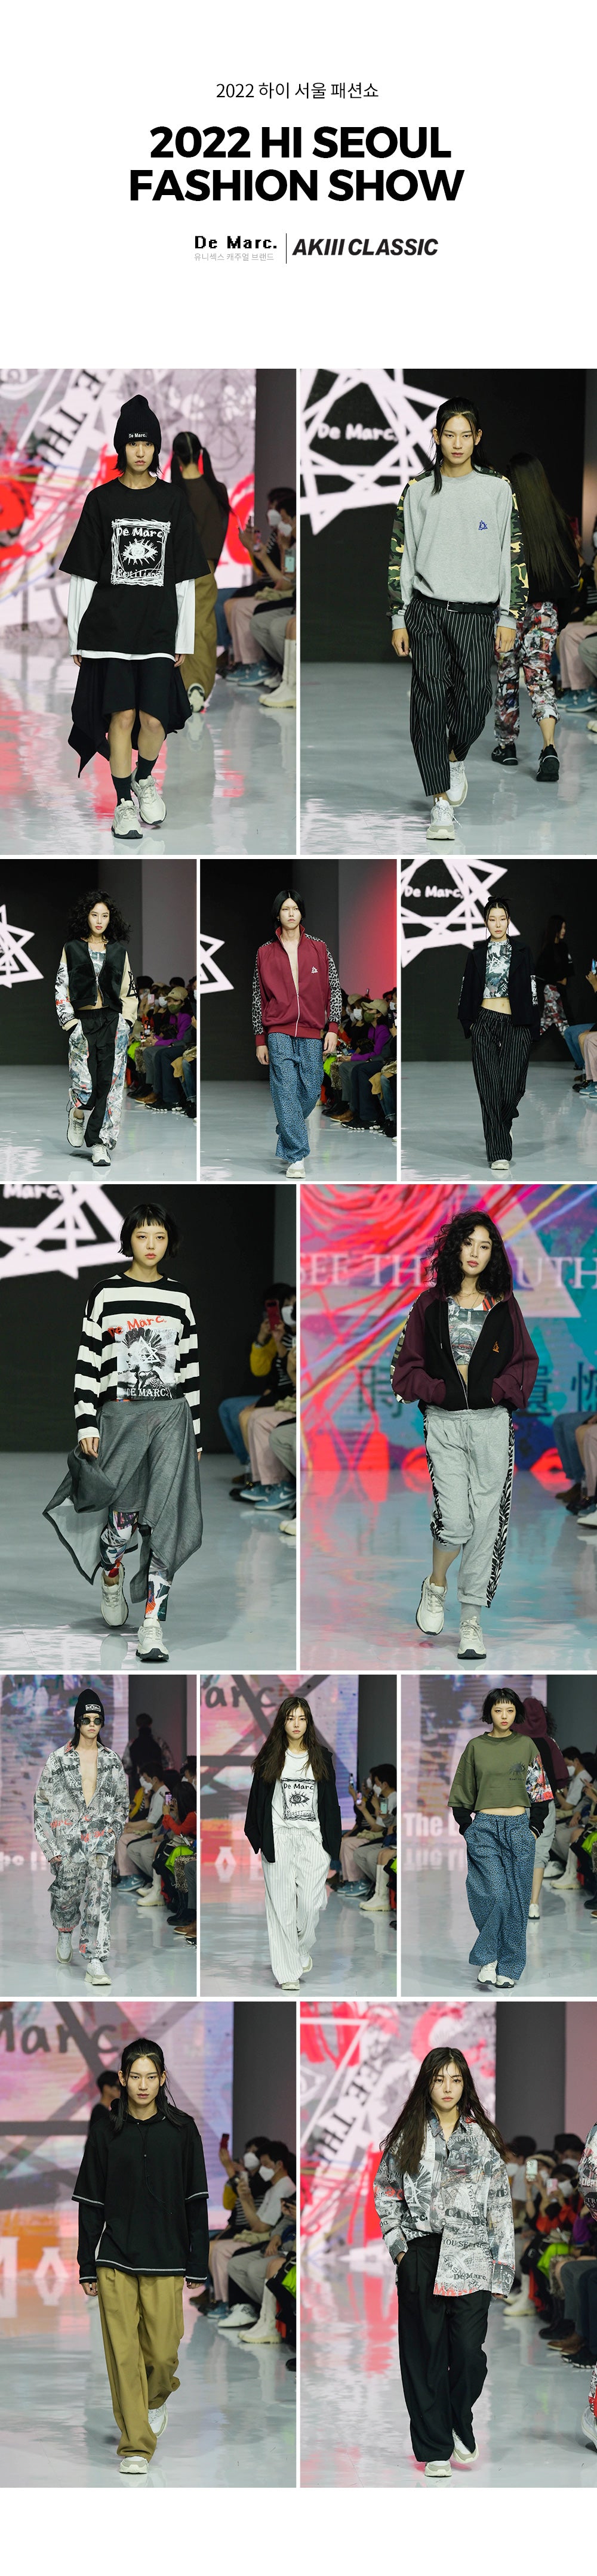 HiSeoul Fashion Show opened in Seoul :  : The official website of  the Republic of Korea